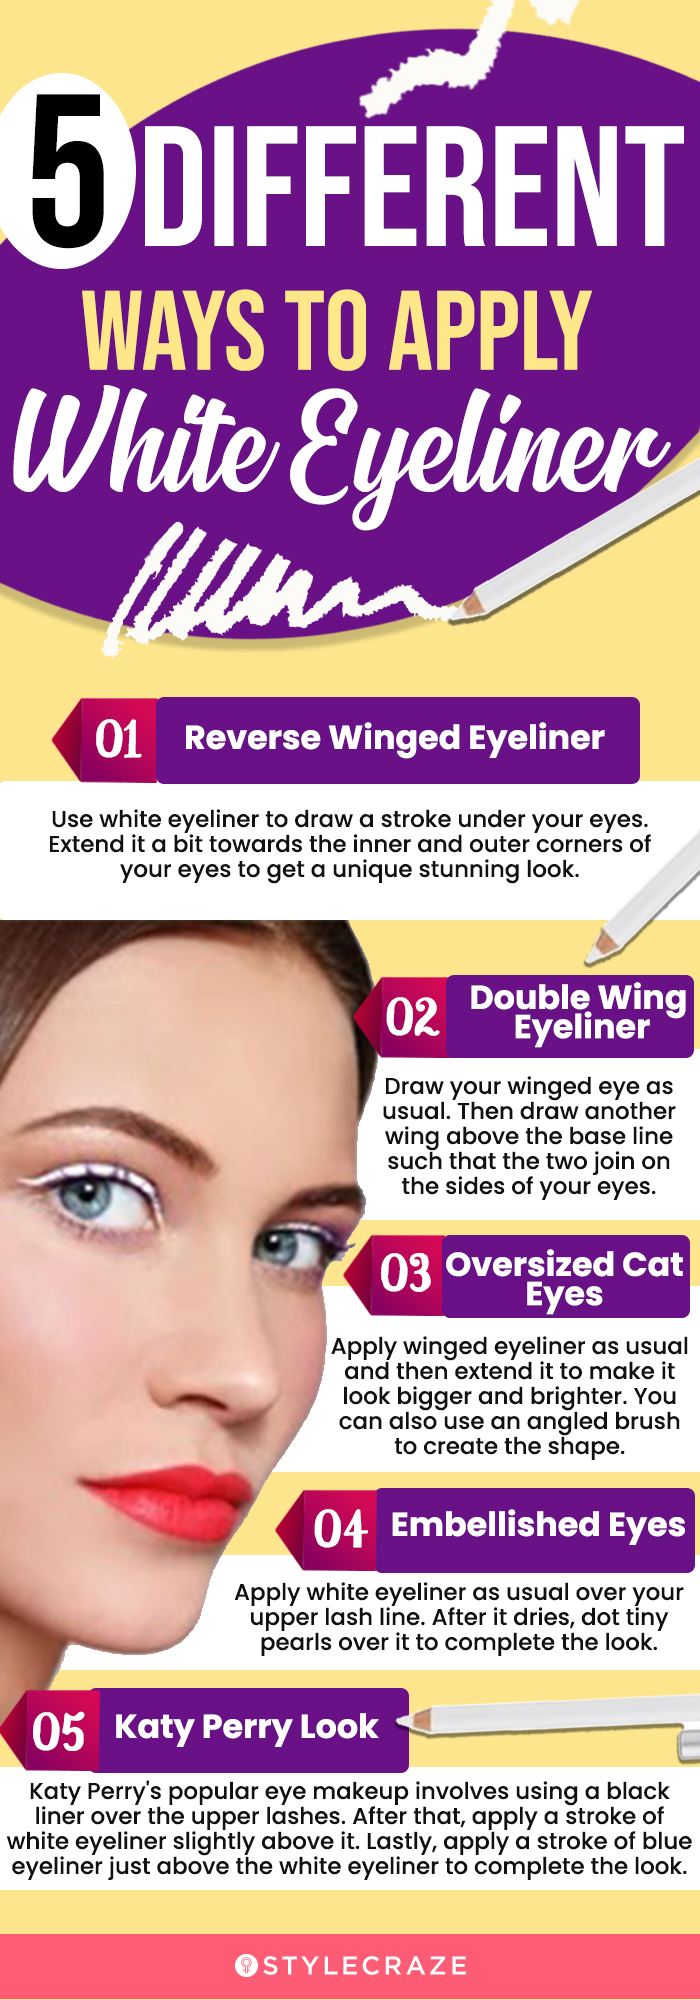 5 Different Ways To Apply White Eyeliner (infographic)